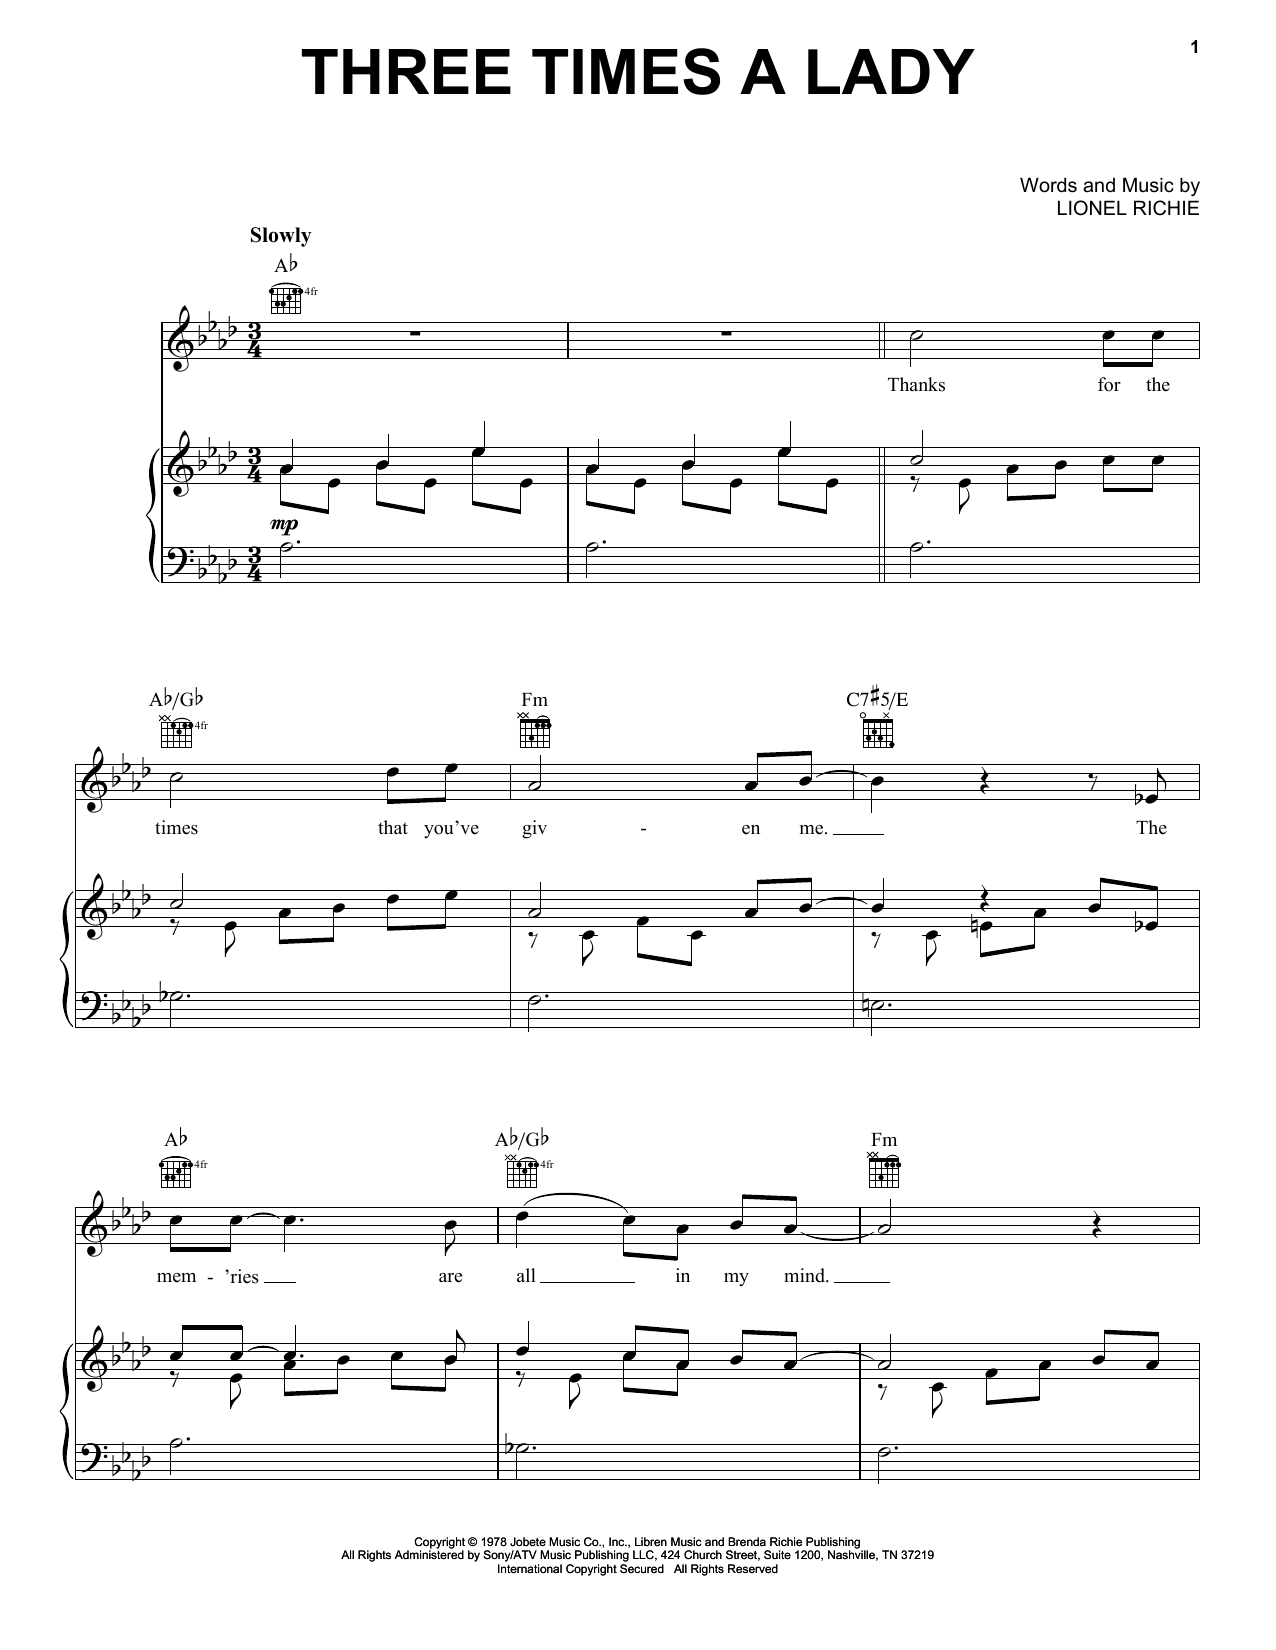 Download The Commodores Three Times A Lady Sheet Music